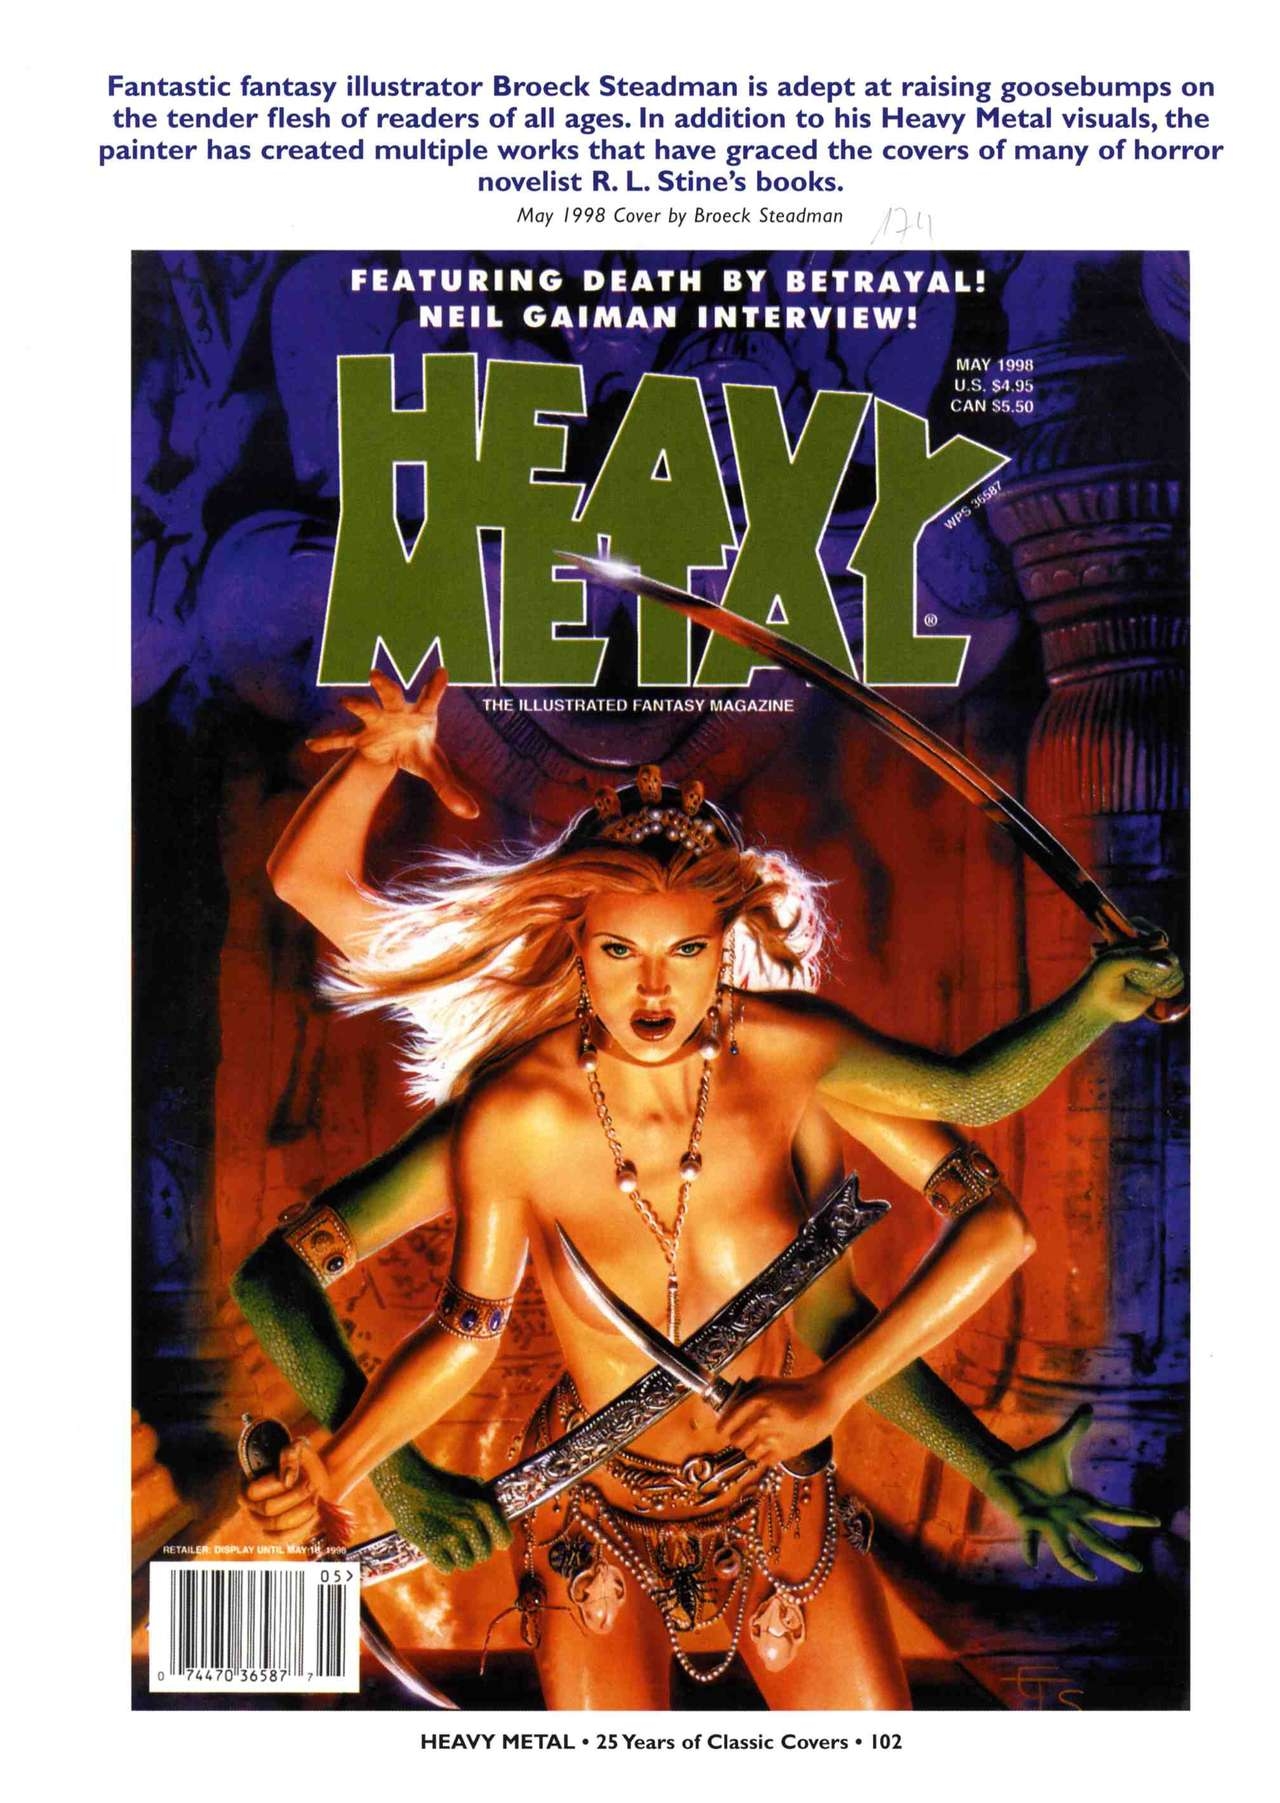 HEAVY METAL 25 Years of Classic Covers 107